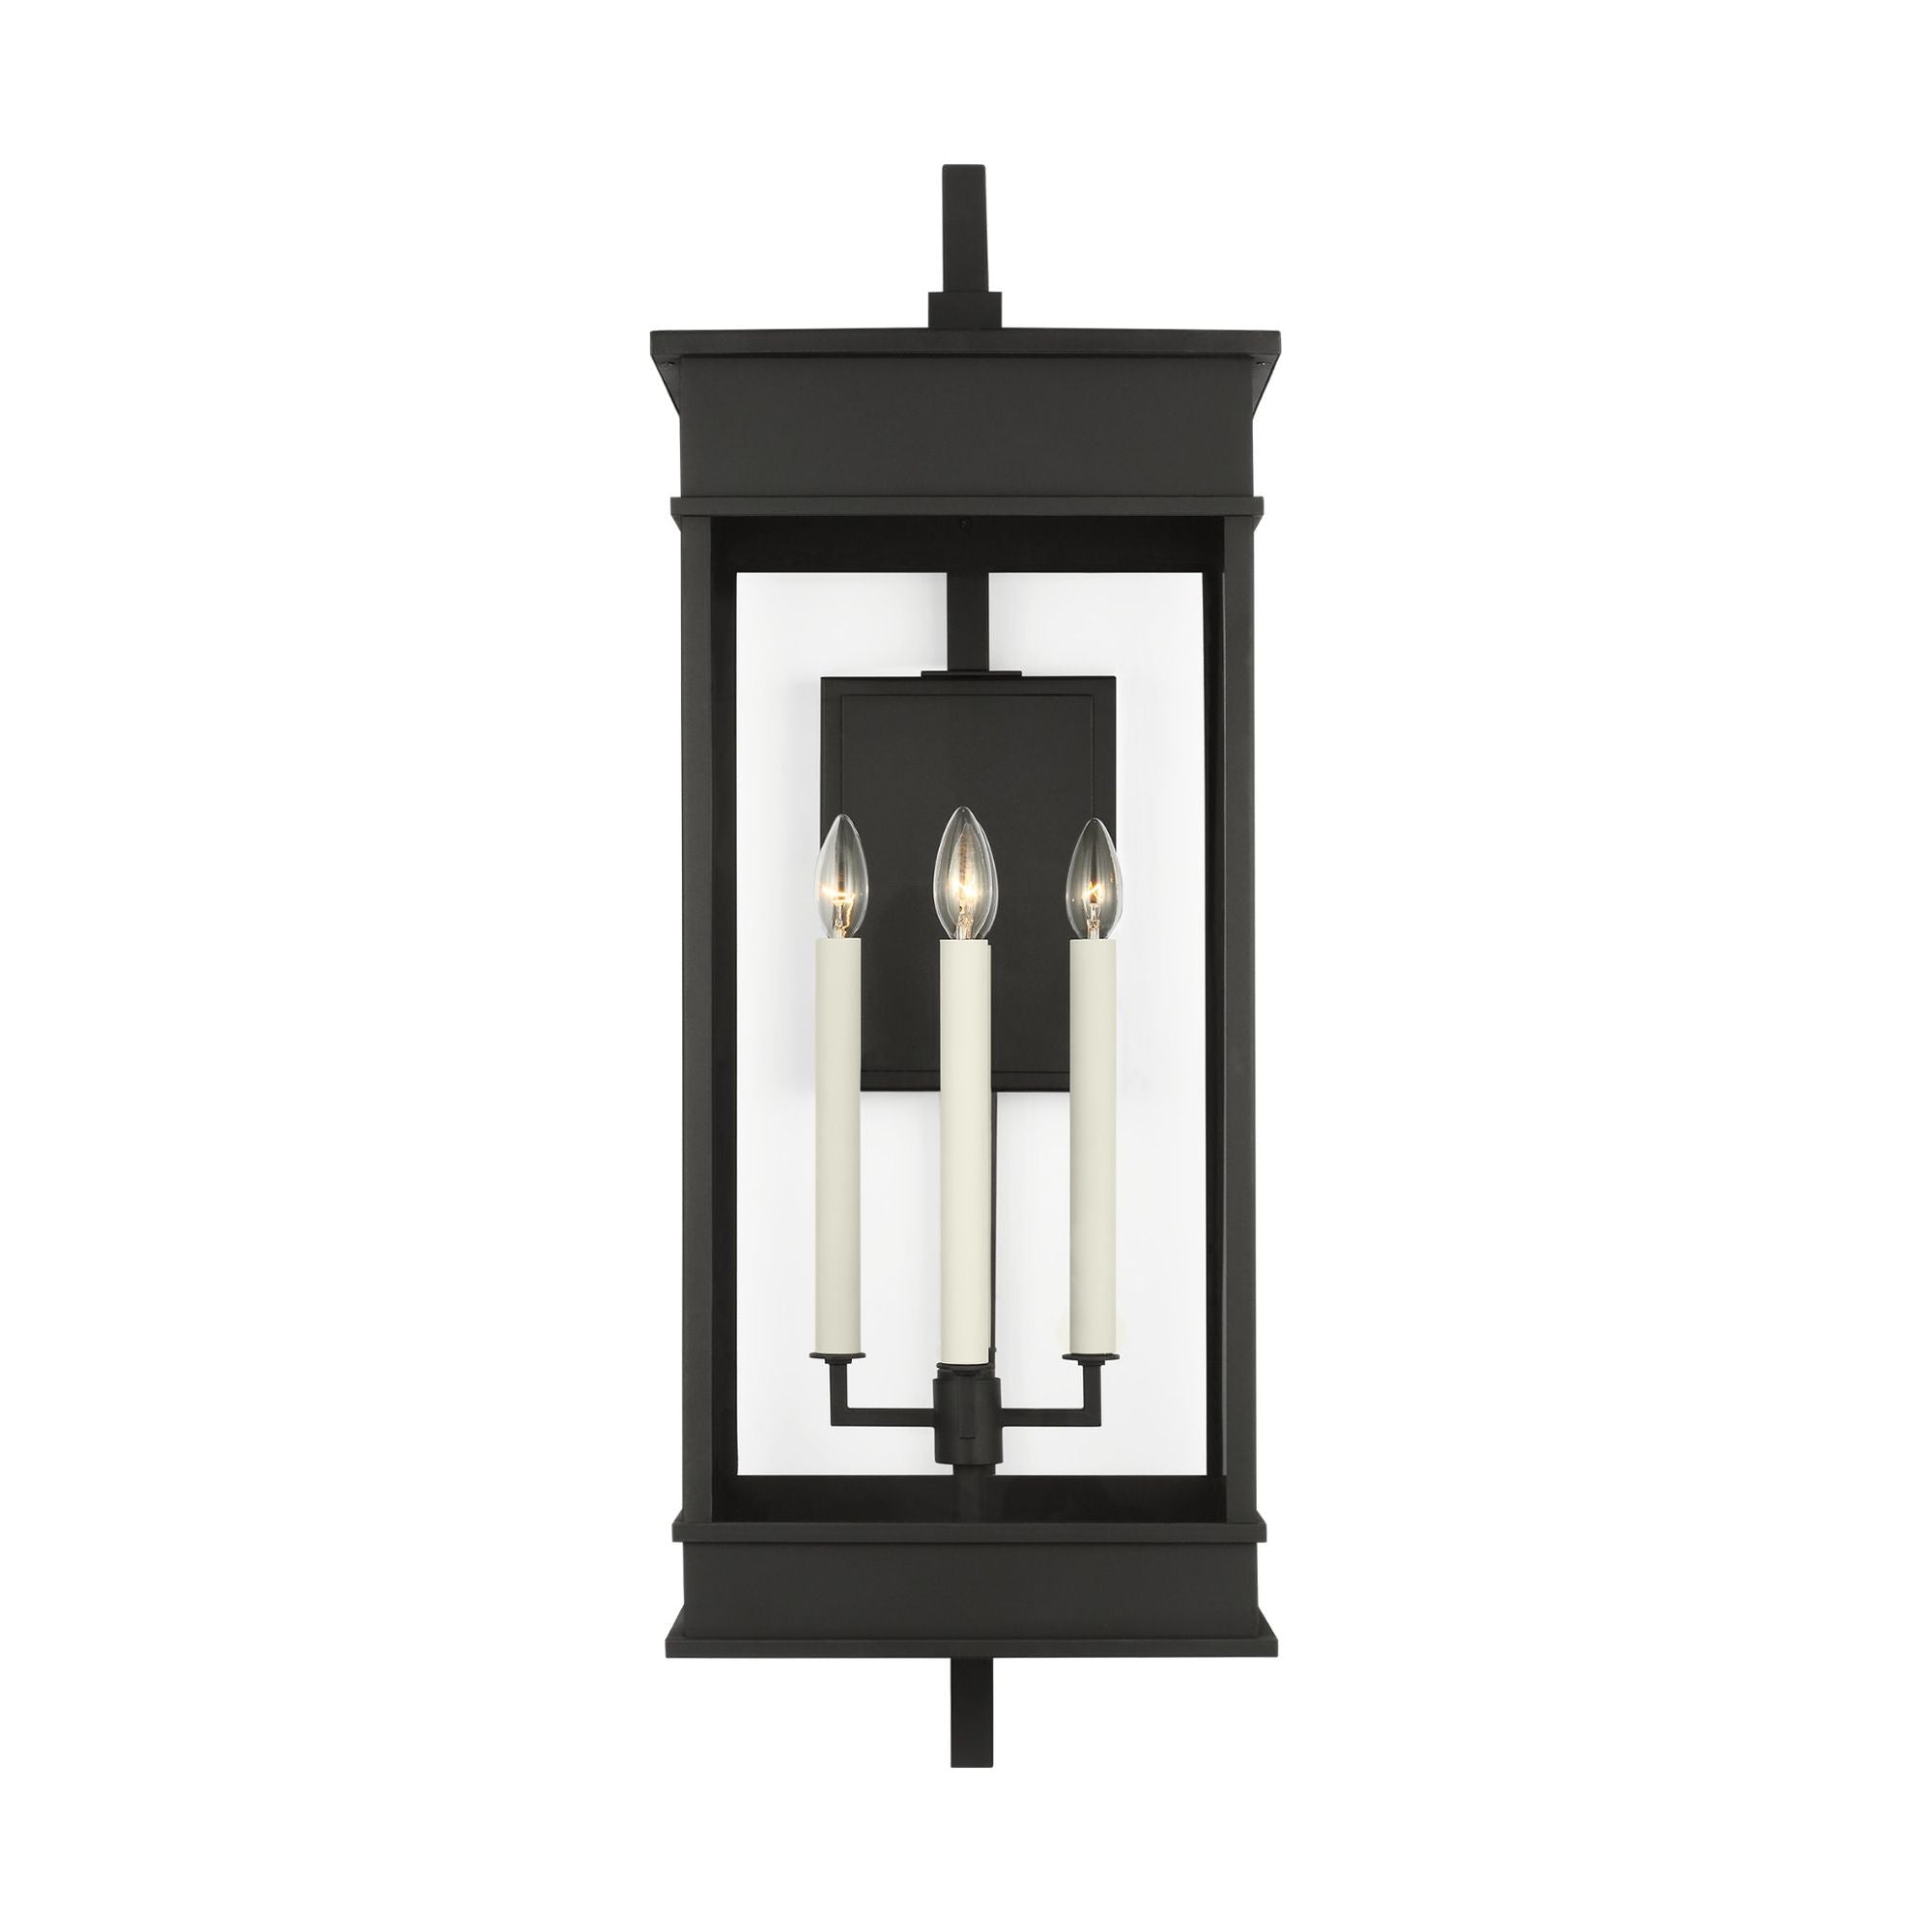 Chapman & Myers Cupertino Extra Large Bracket Wall Lantern in Textured Black